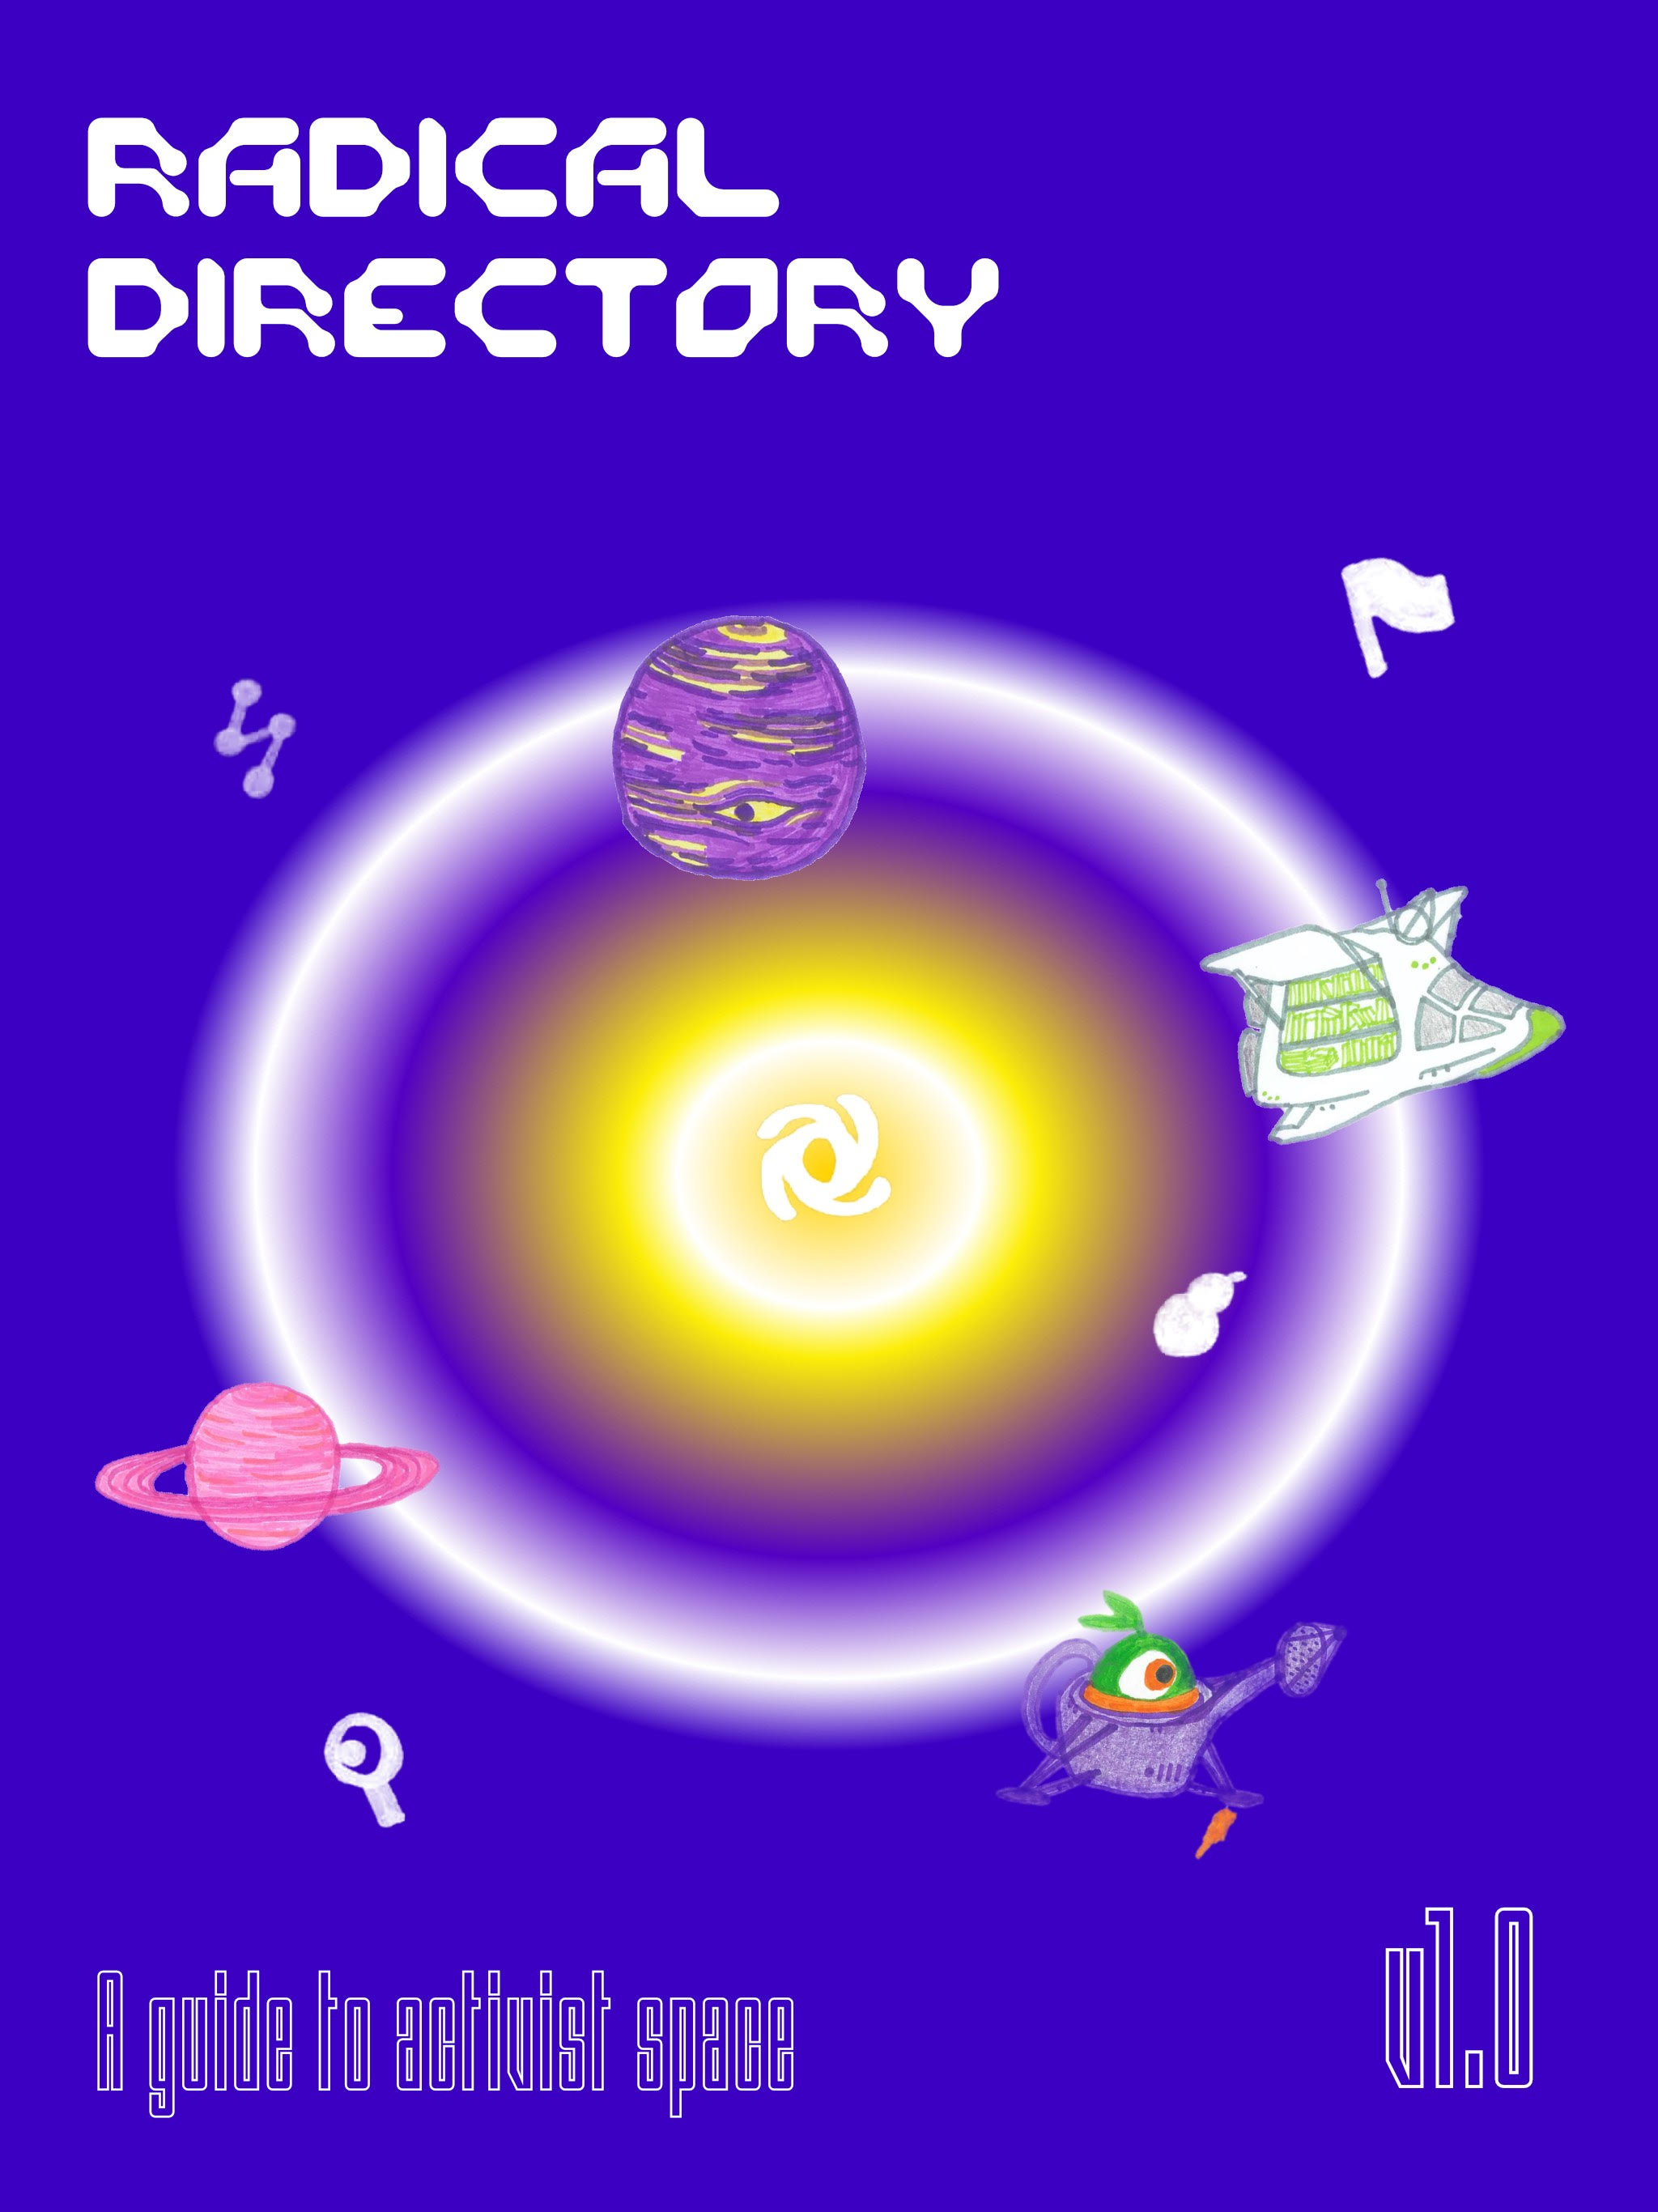 Photo of a zine cover - the background is blue/purple, the text says Radical Directory, A guide to activist space, Vol.10, there are pictures of planets and spaceships